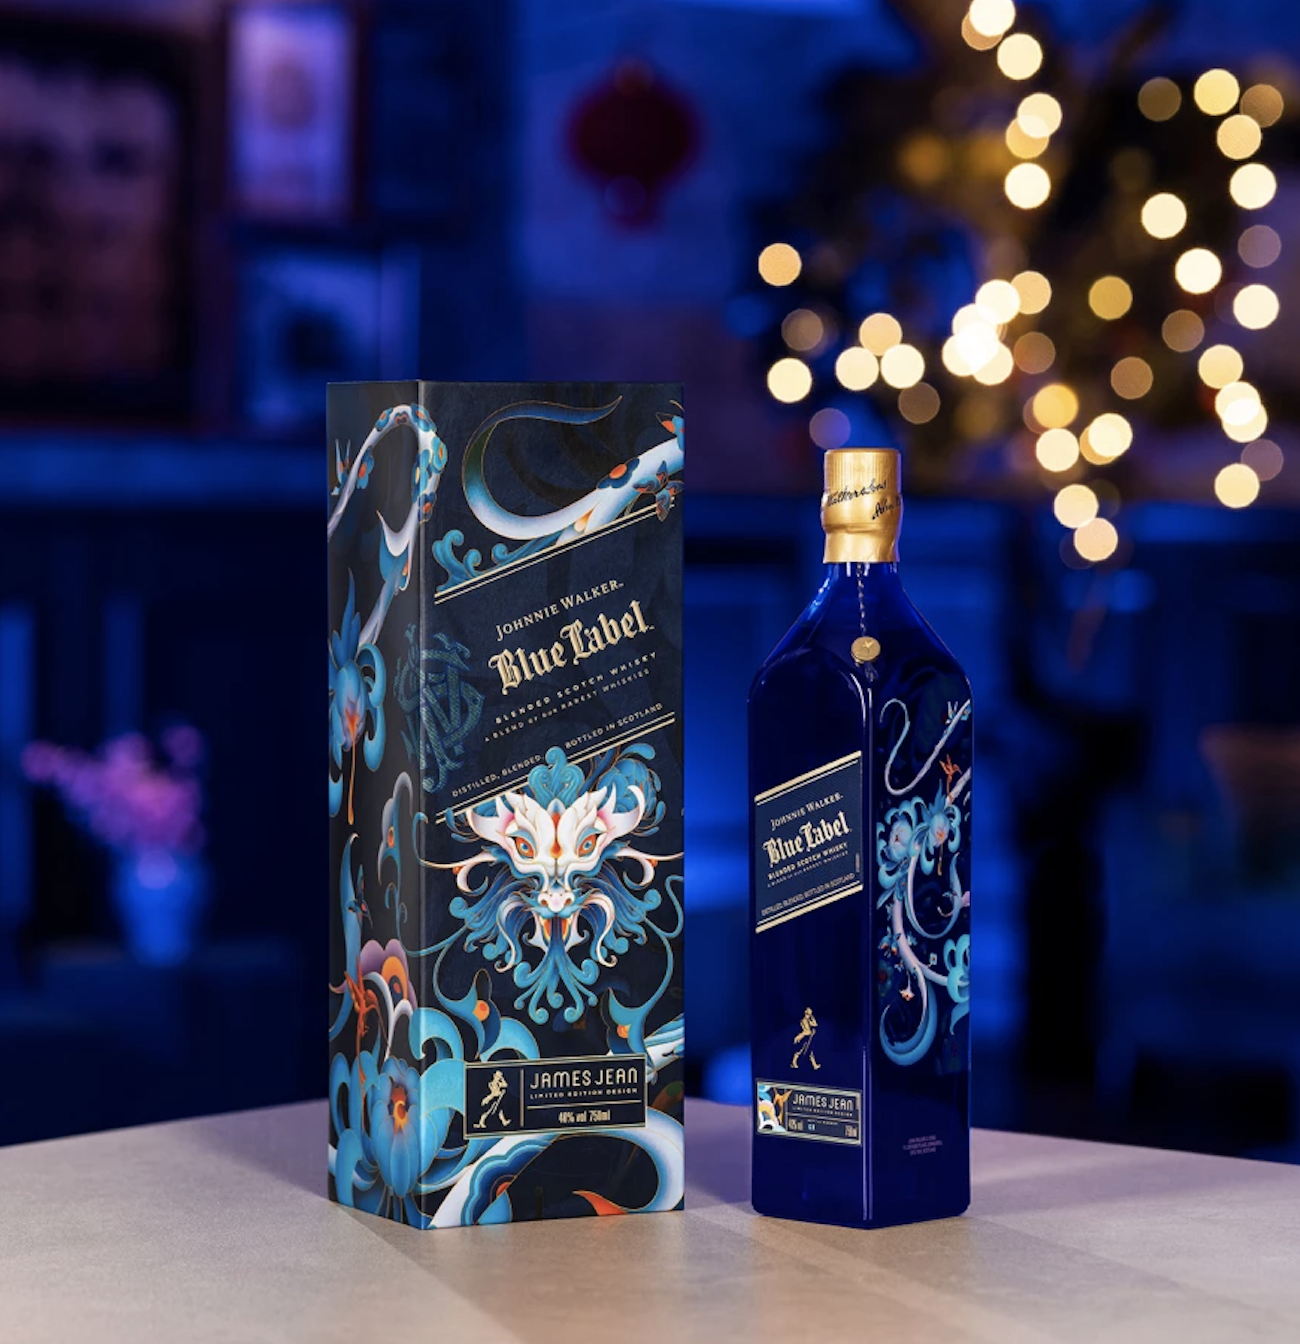 Bottle of Blue Label next to box inspired by the Year of the Dragon